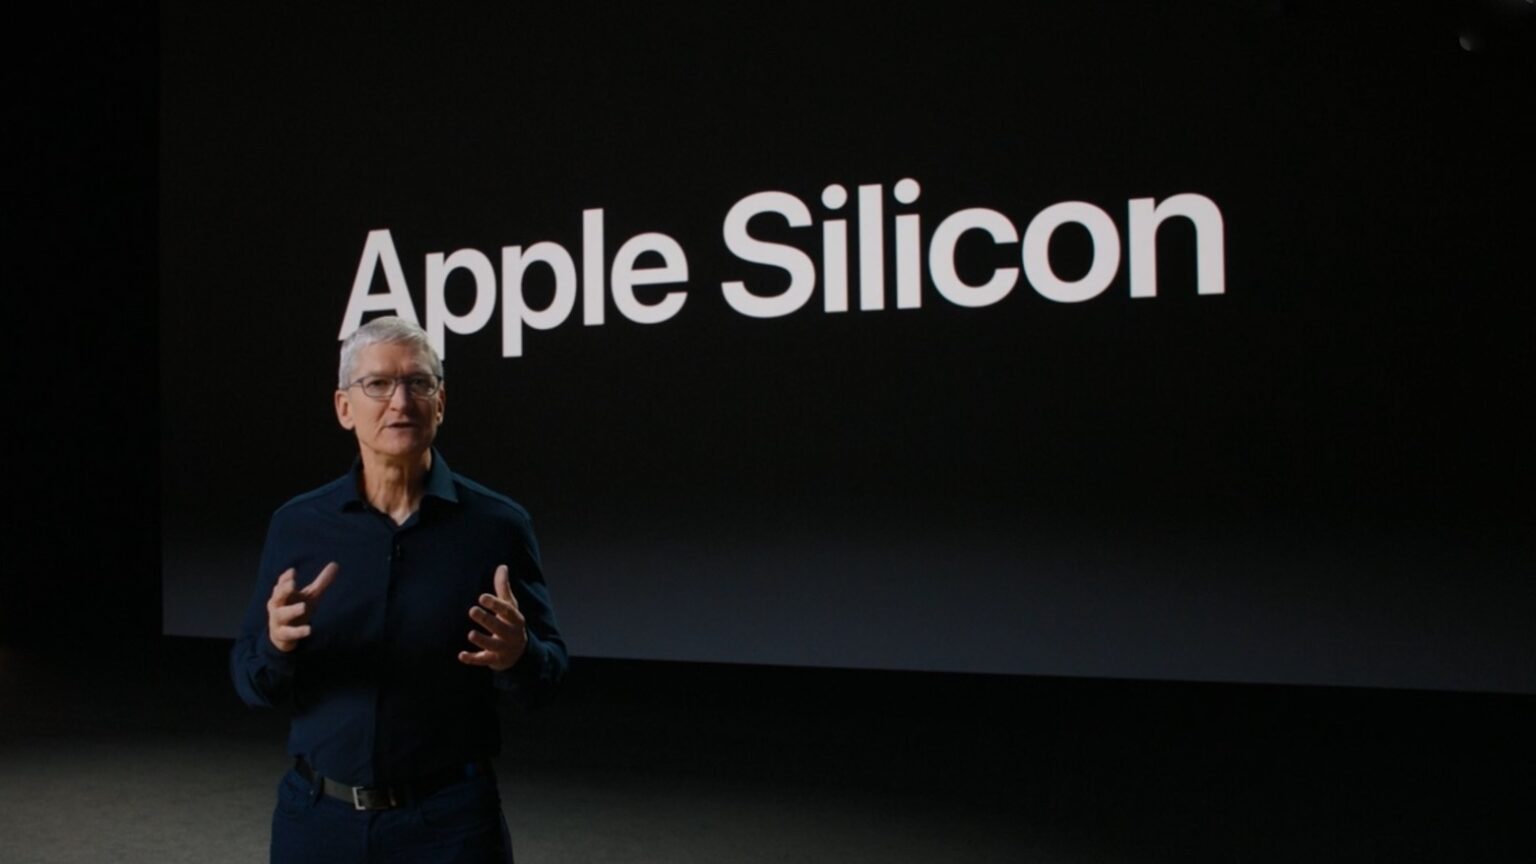 Apple silicon will power future Mac desktops and laptops